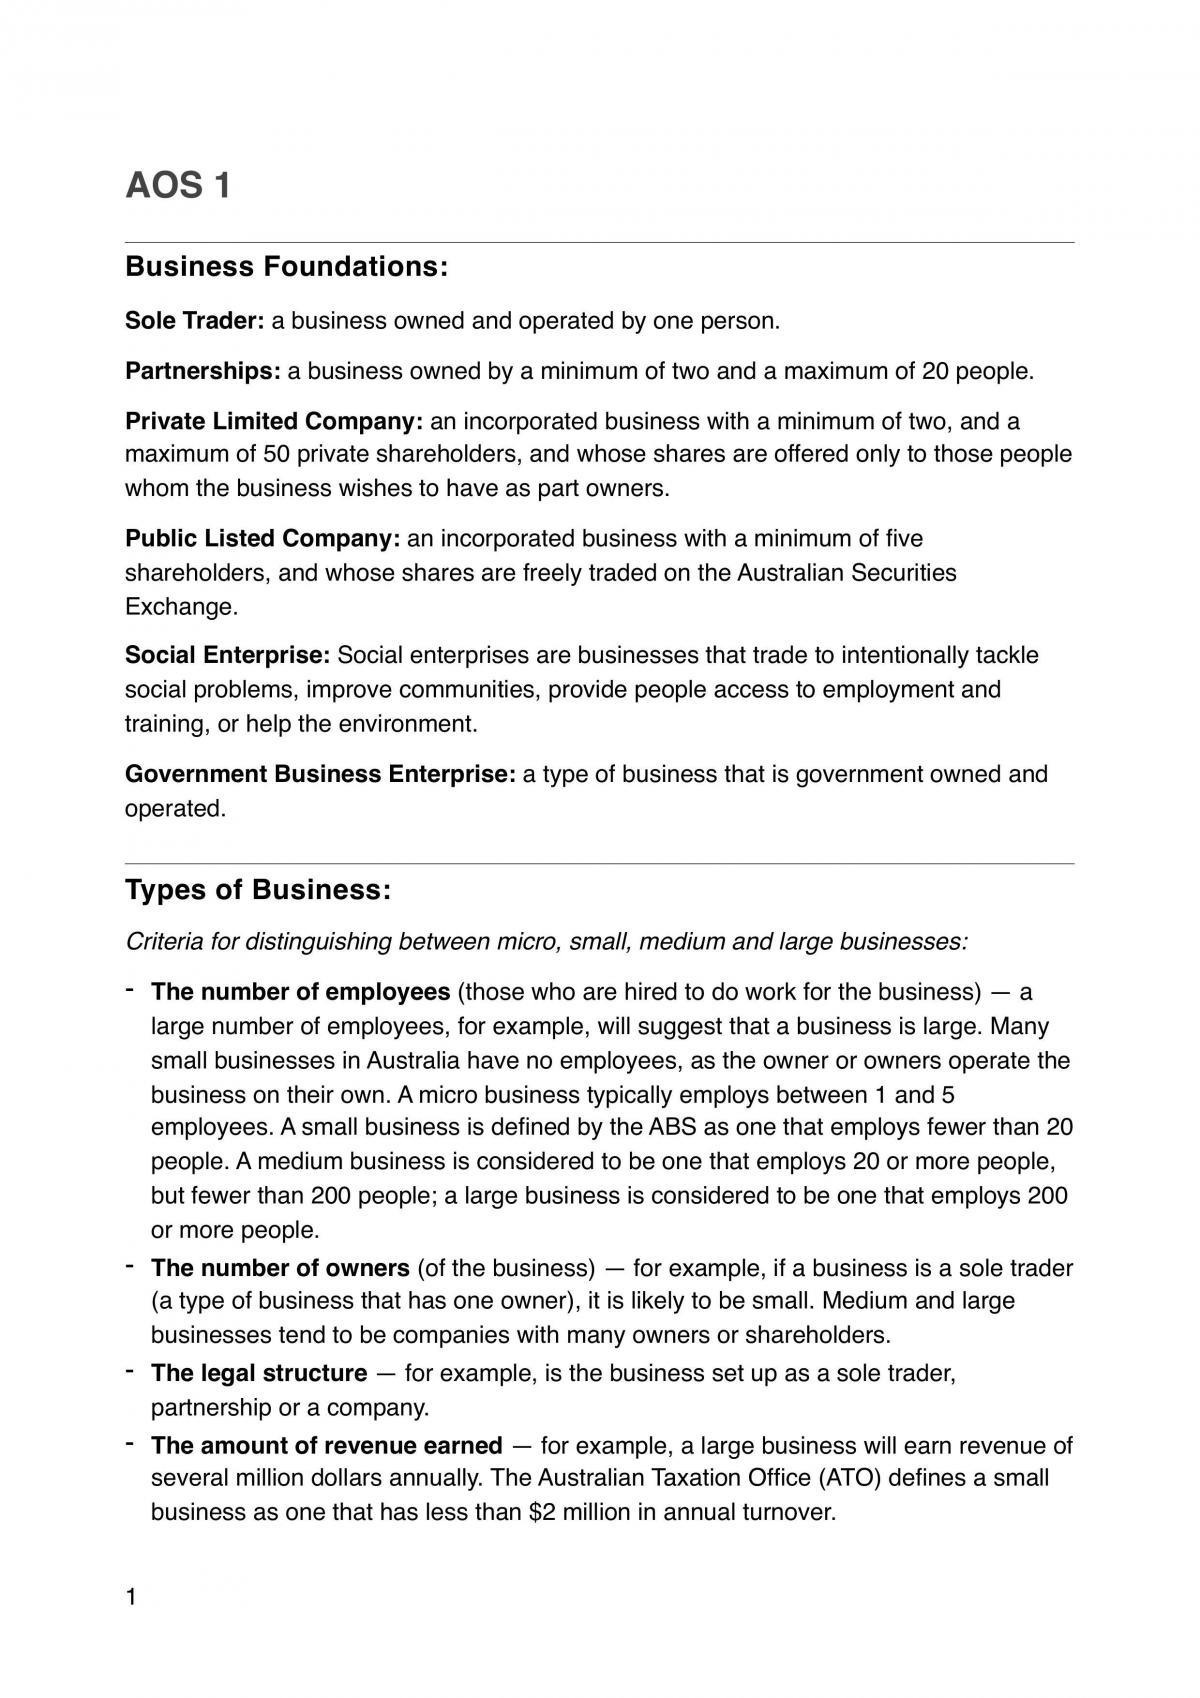 BUS1BFX Business Fundamentals Notes - Page 1